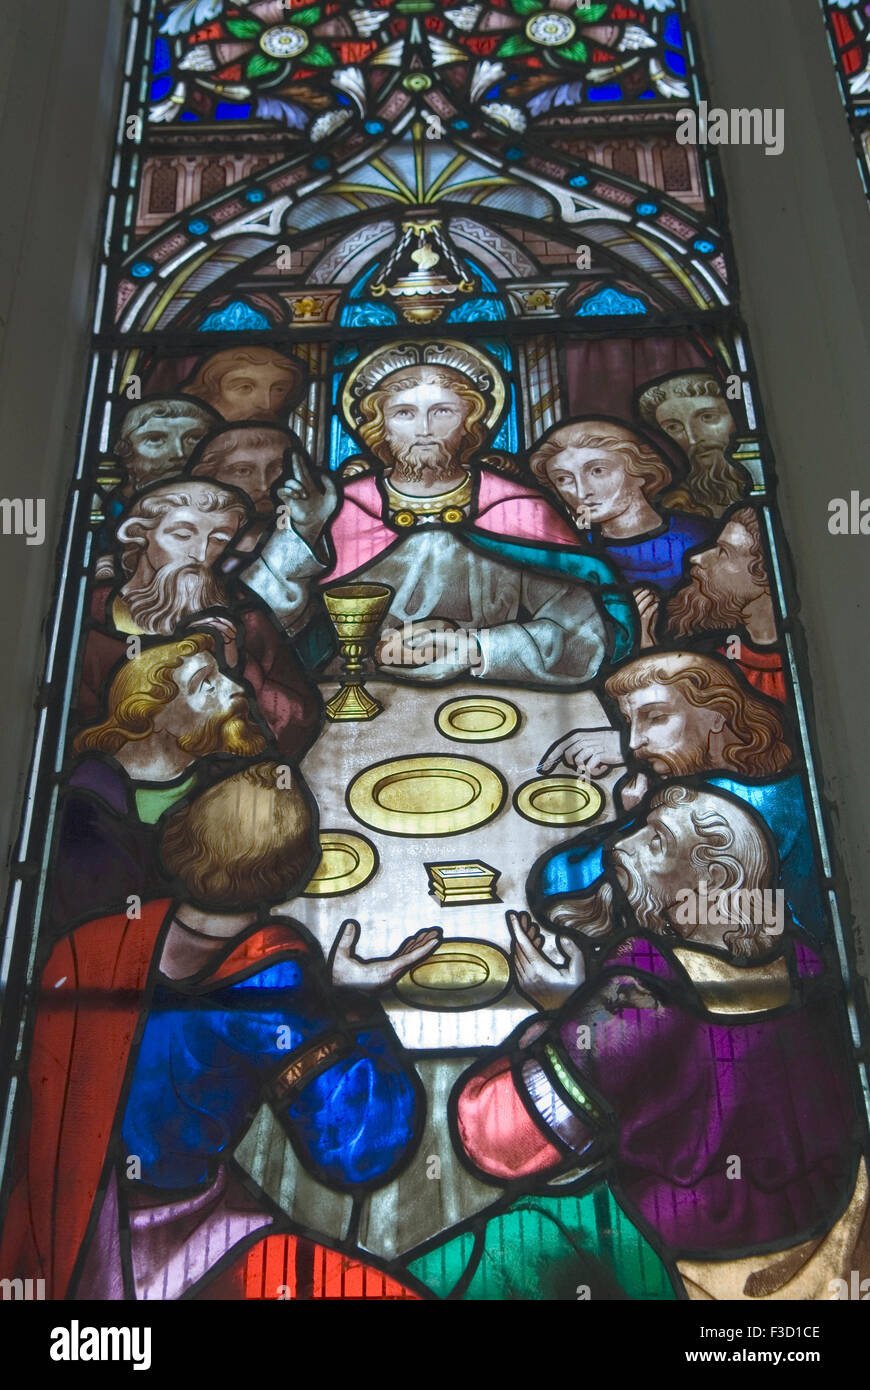 Modern stained glass window of Christ at The Last Supper in St Marys Church Bumpstead, Essex, England 2nd October 2015.  HOMER SYKES Stock Photo